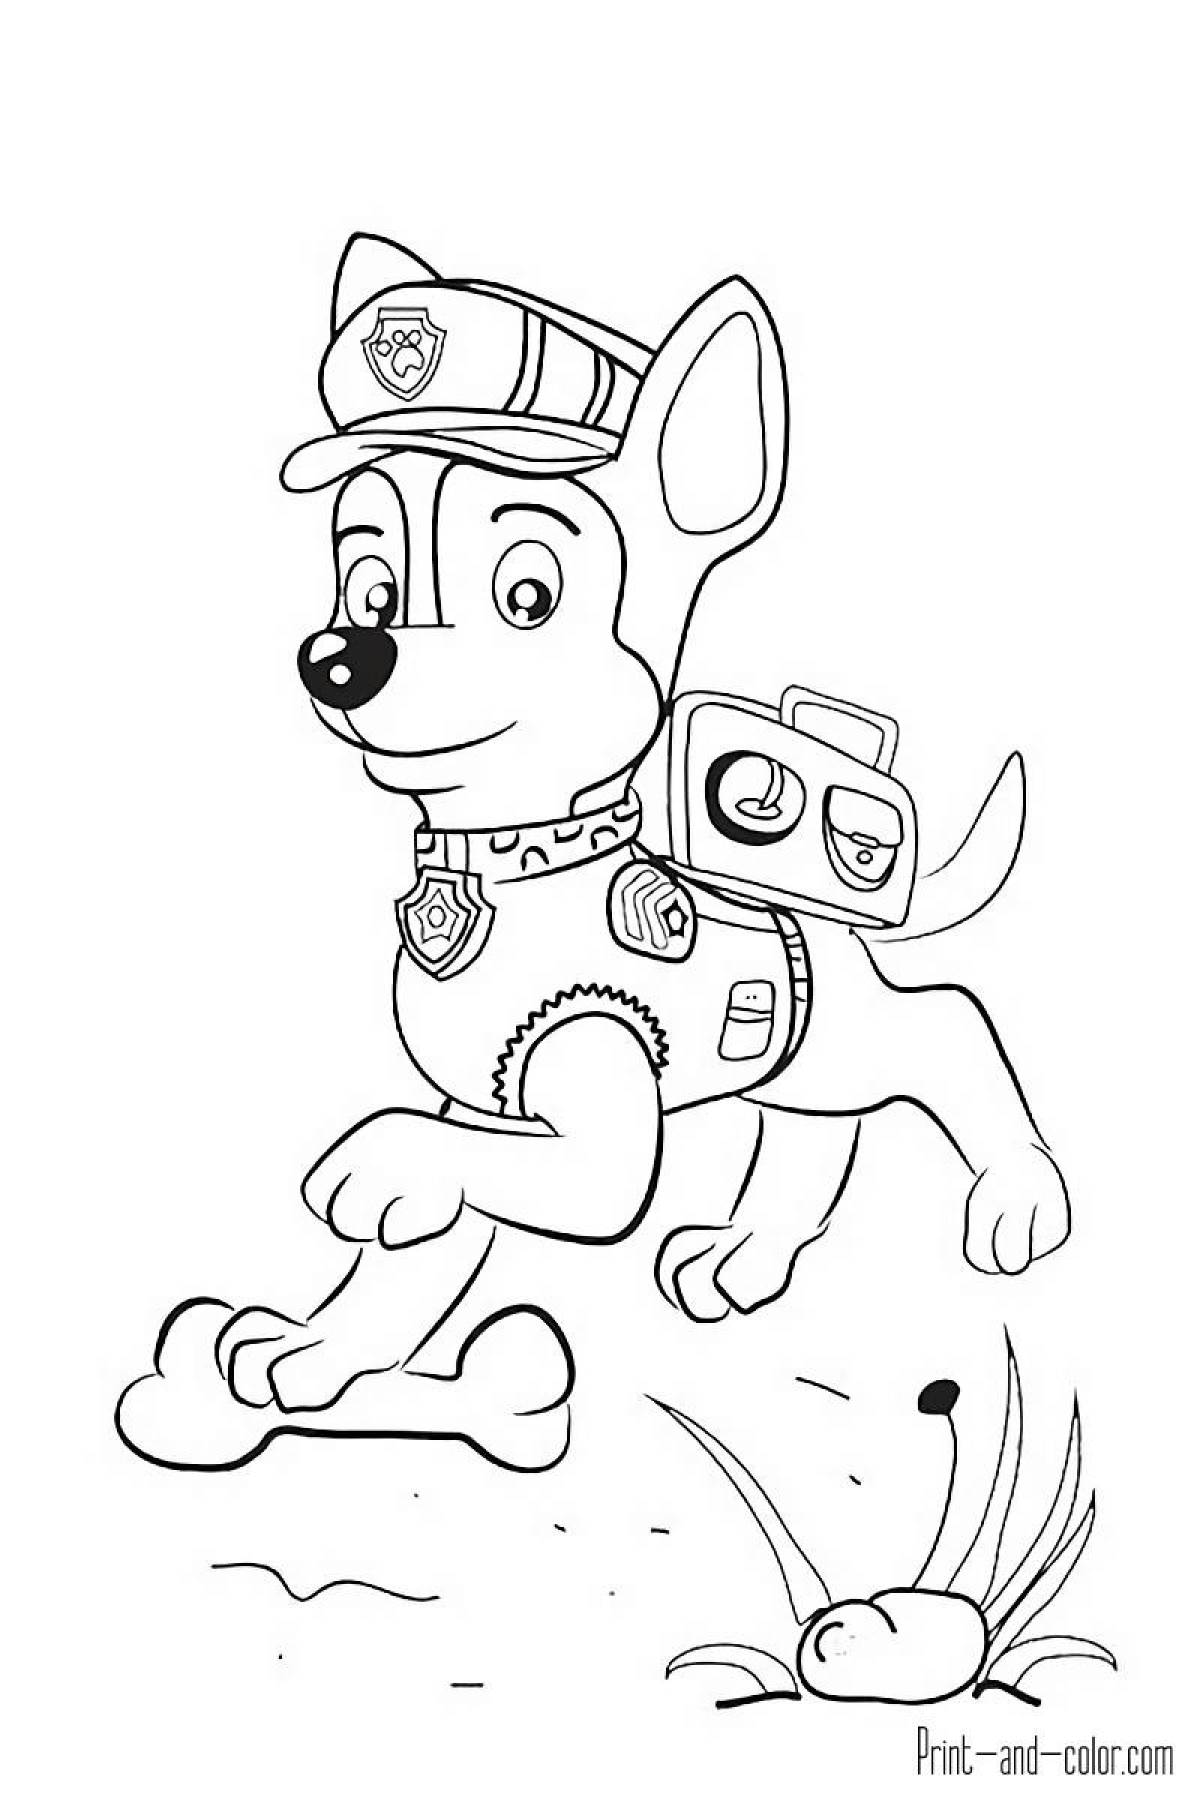 Animated coloring page paw patrol racer